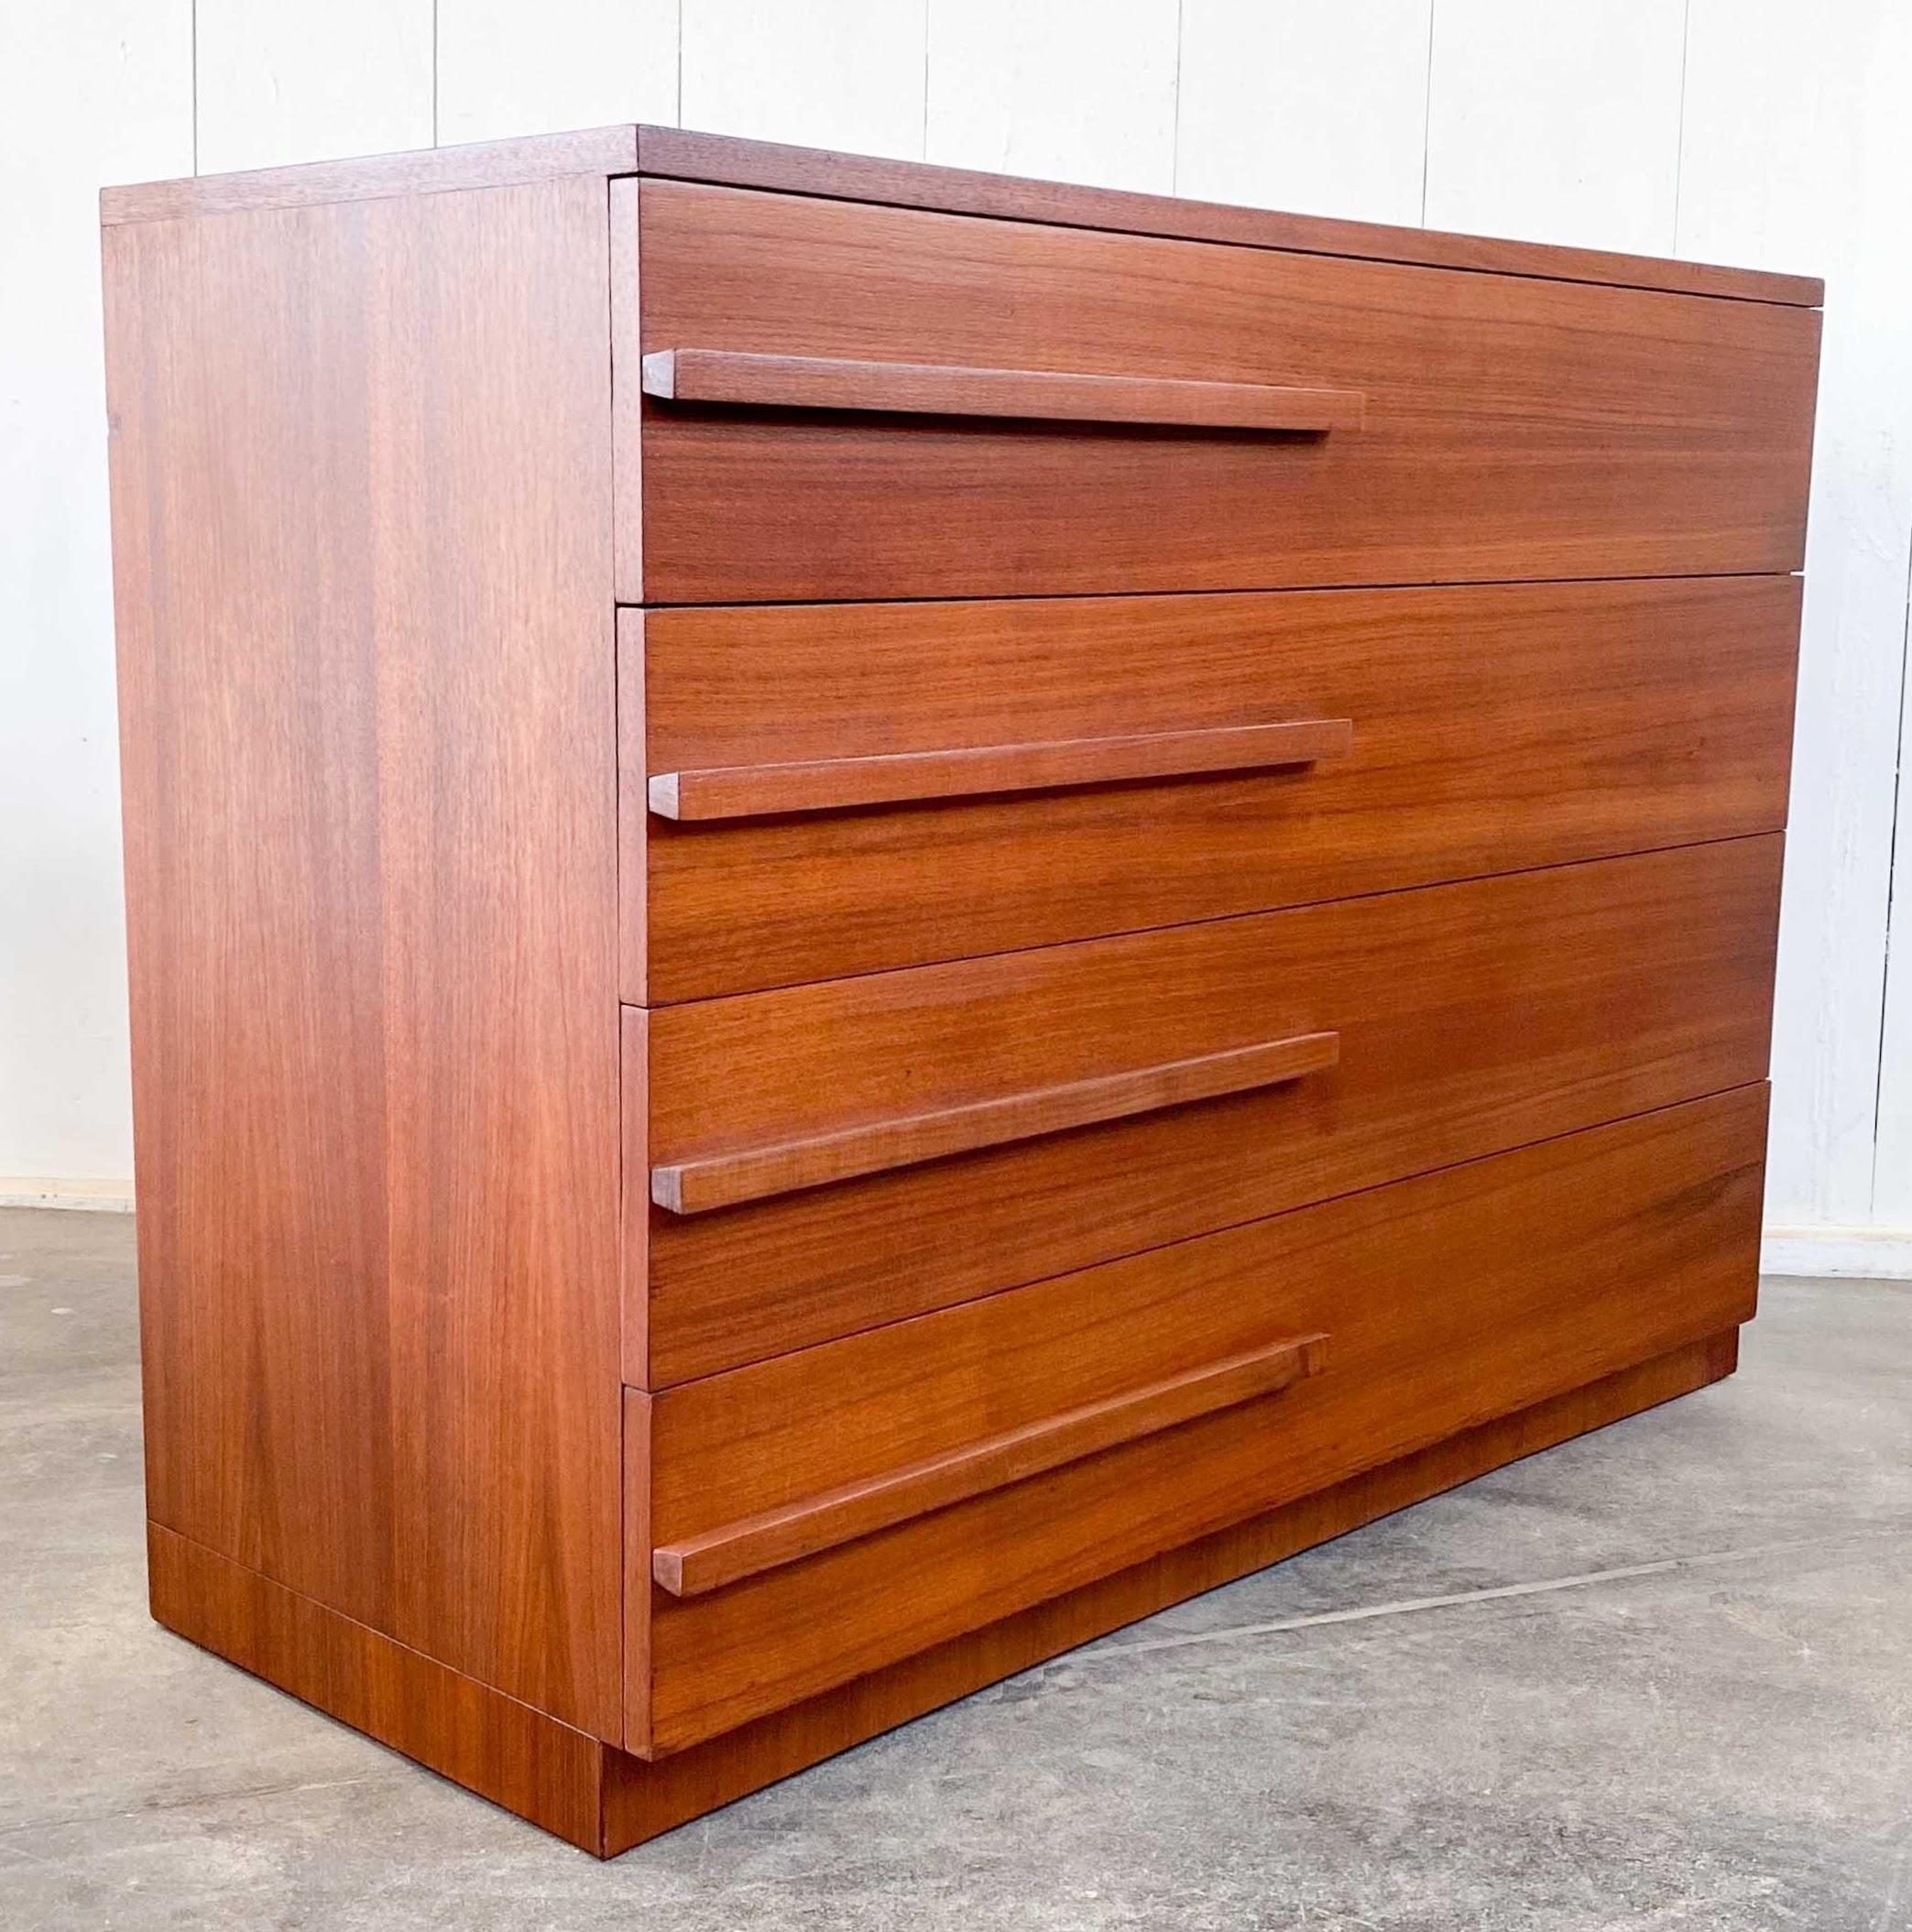 American Art Deco Streamline Mahogany Dresser by Modernage, N.Y., 1930s In Good Condition For Sale In Camden, ME